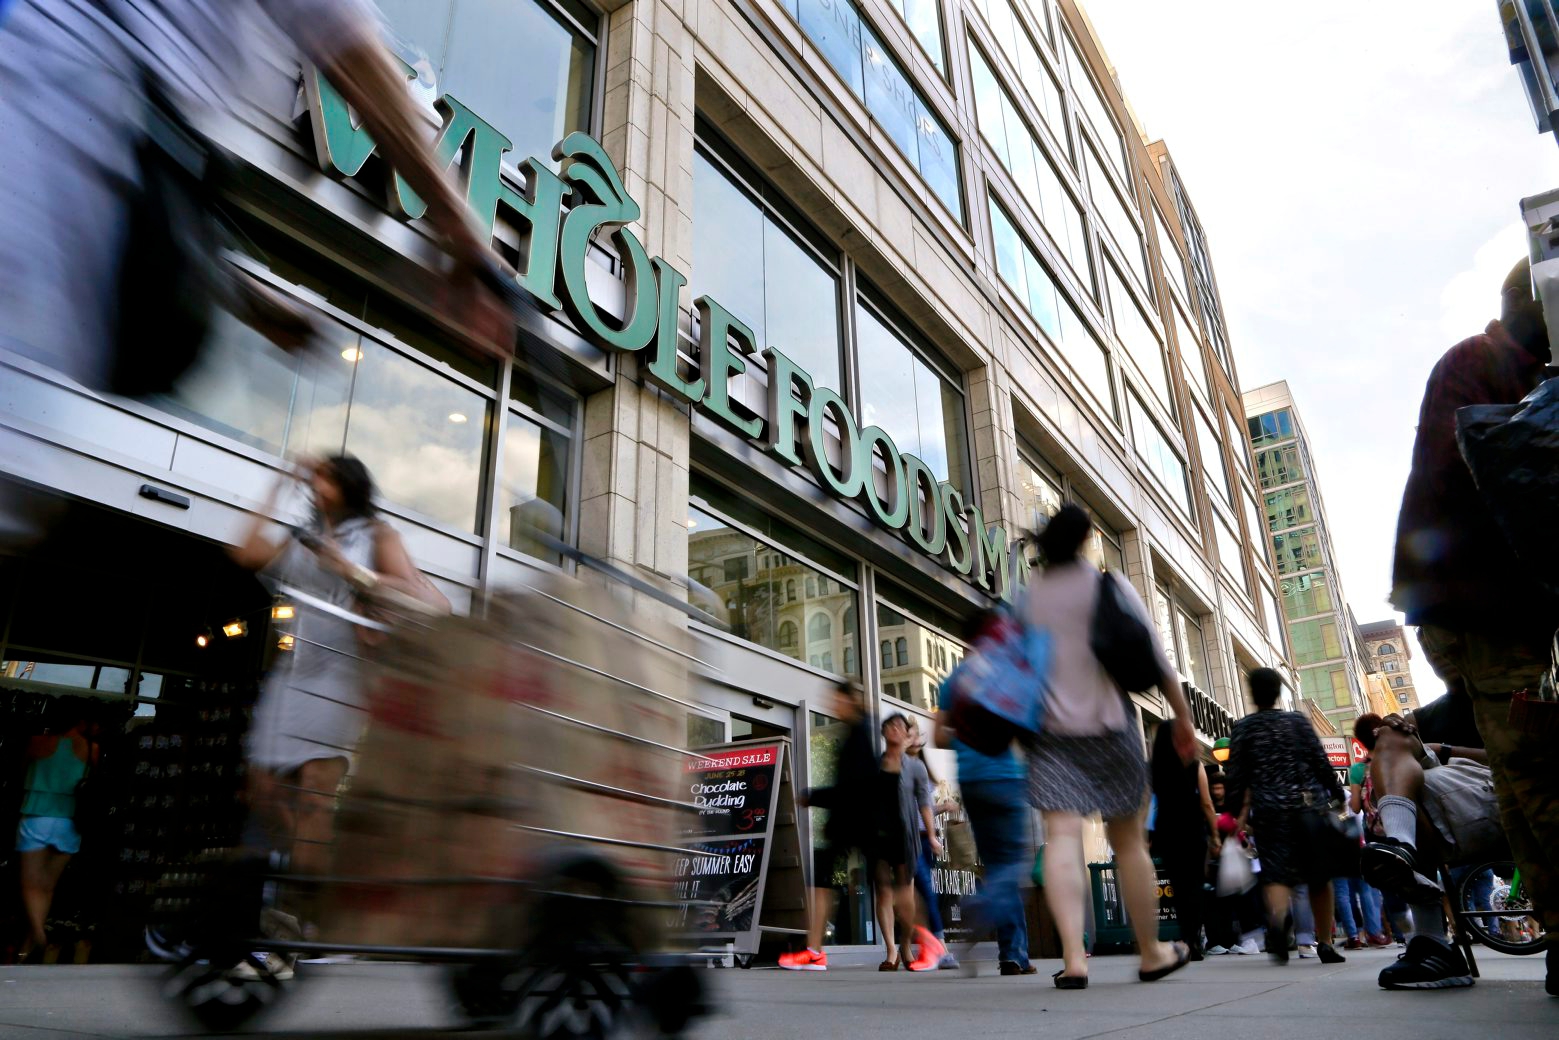 FILE - In this Wednesday, June 24, 2015, file photo, pedestrians pass in front of a Whole Foods Market store in Union Square,  in New York. On Wednesday, Feb. 10, 2016, Whole Foods Market Inc. reports financial results. (AP Photo/Julie Jacobson, File) Earns Whole Foods Market Inc